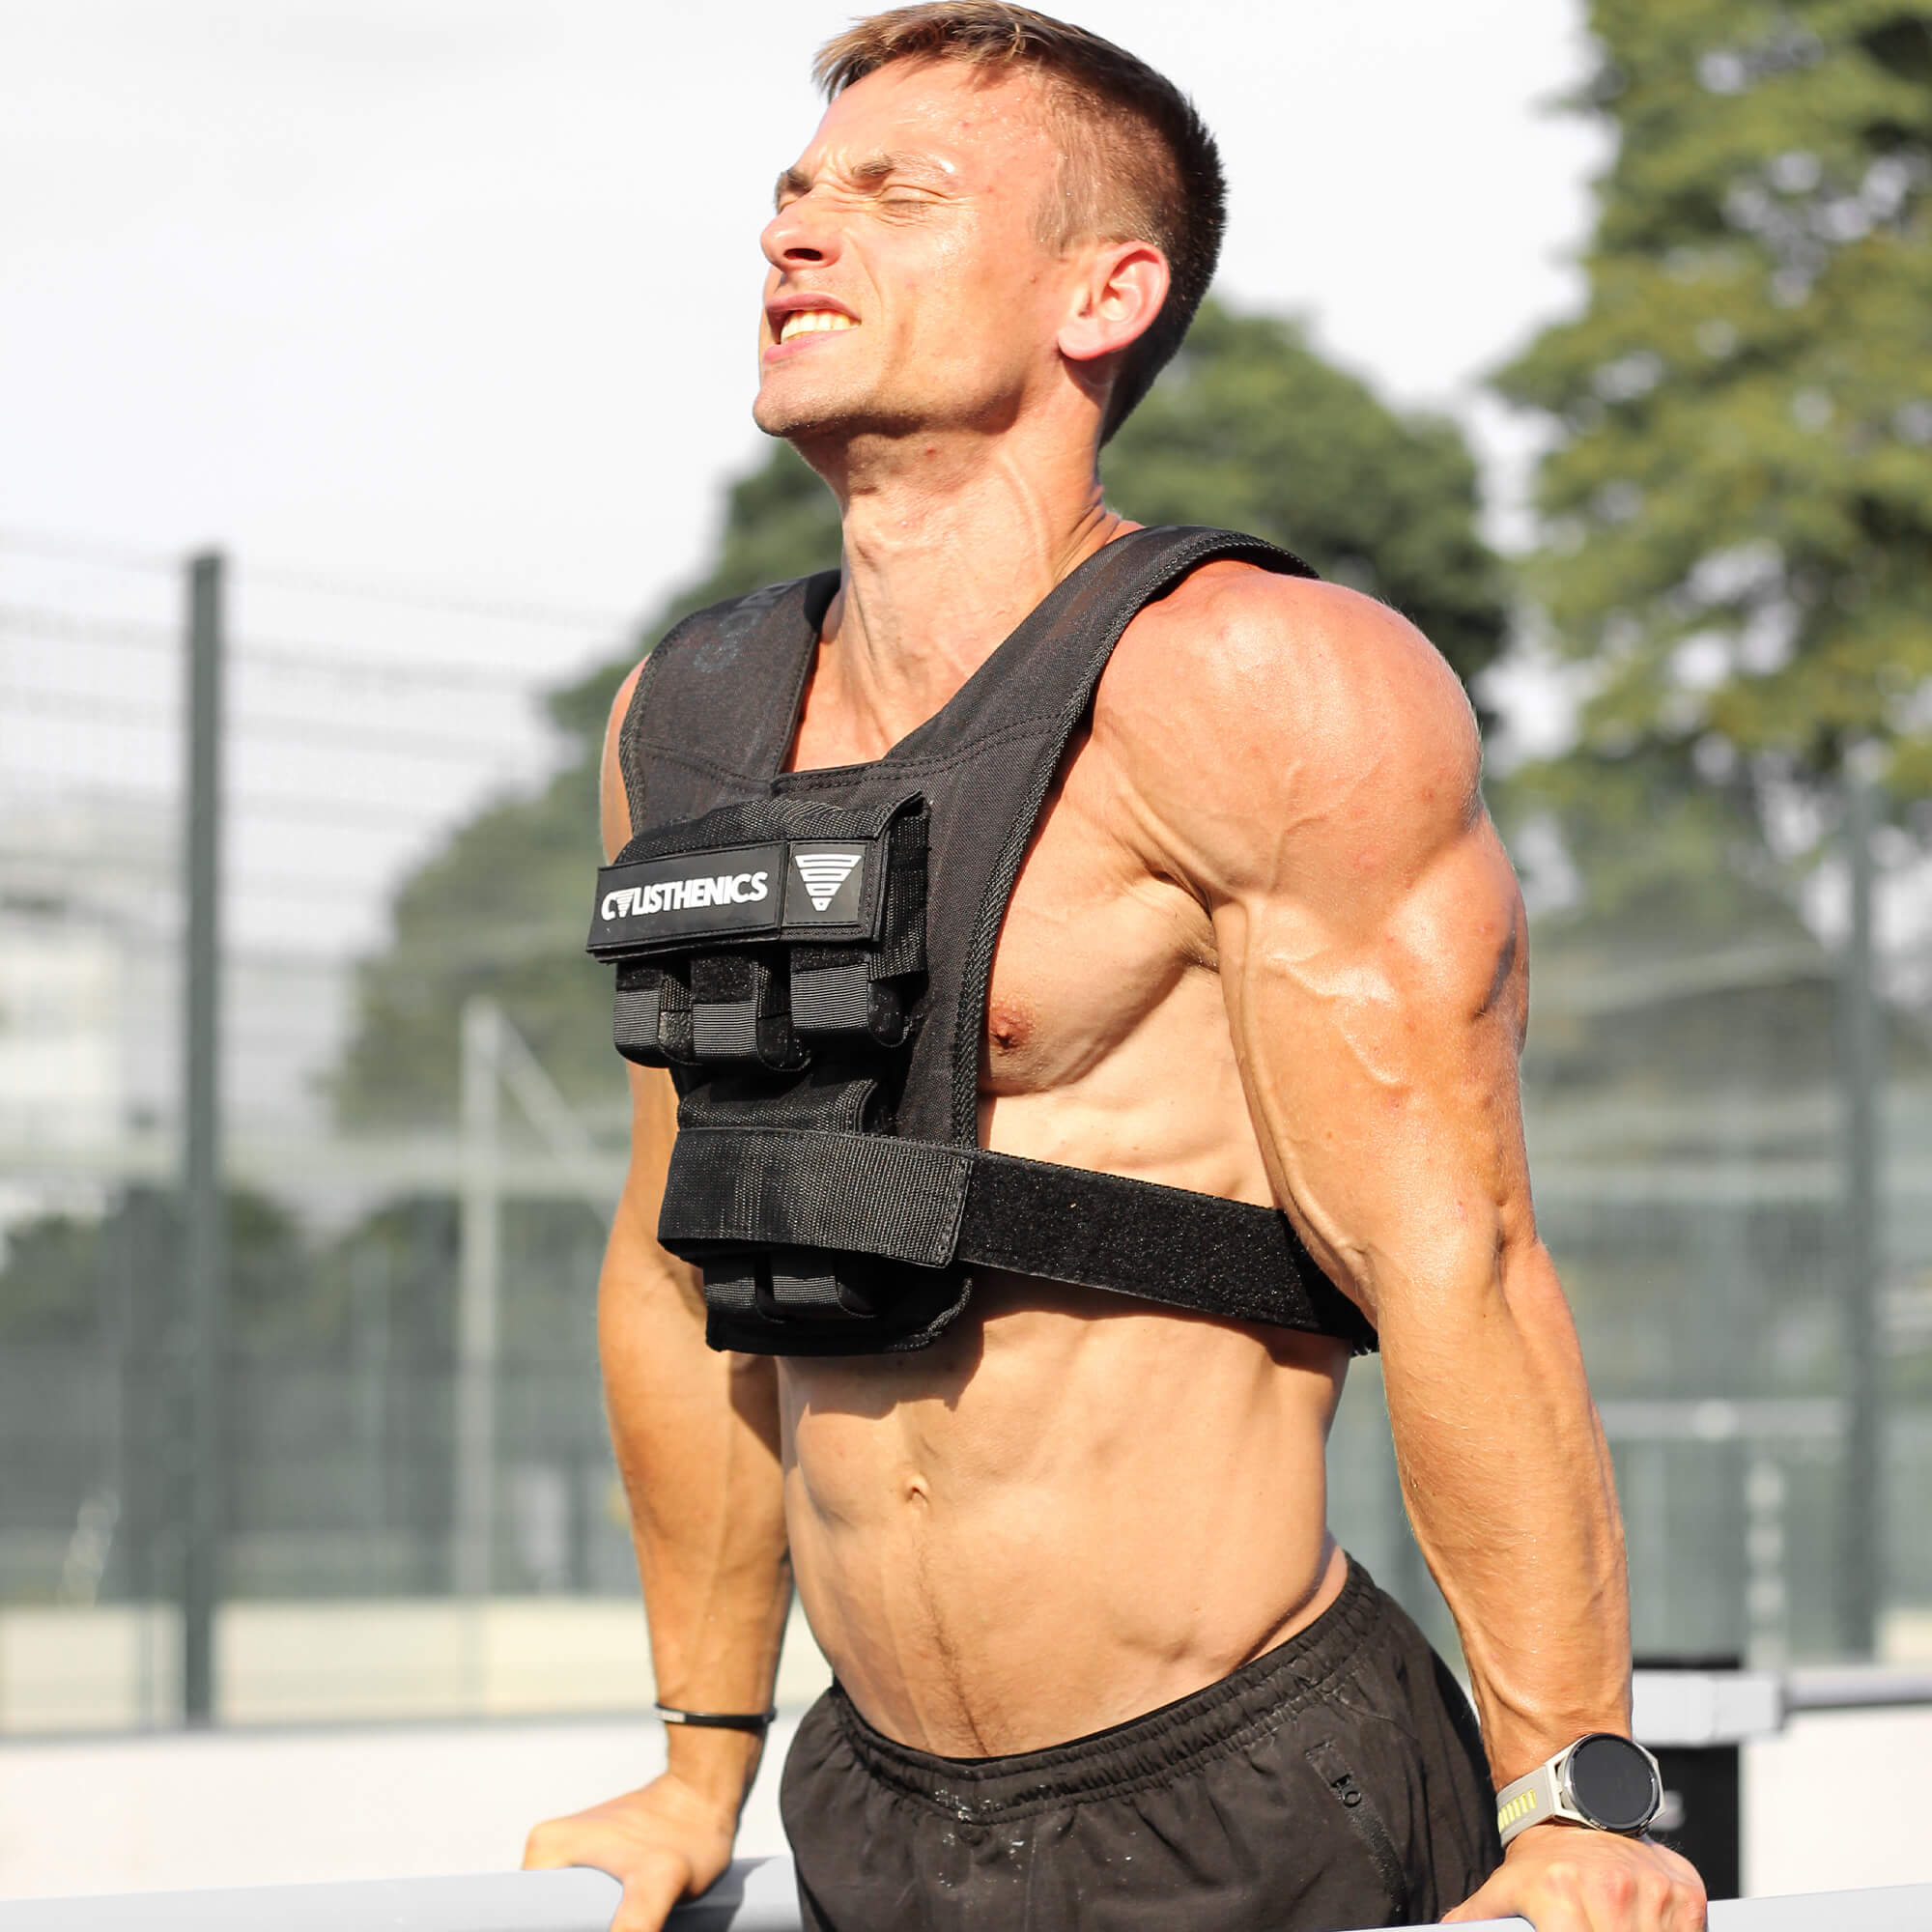 max true with weight vest doing dips